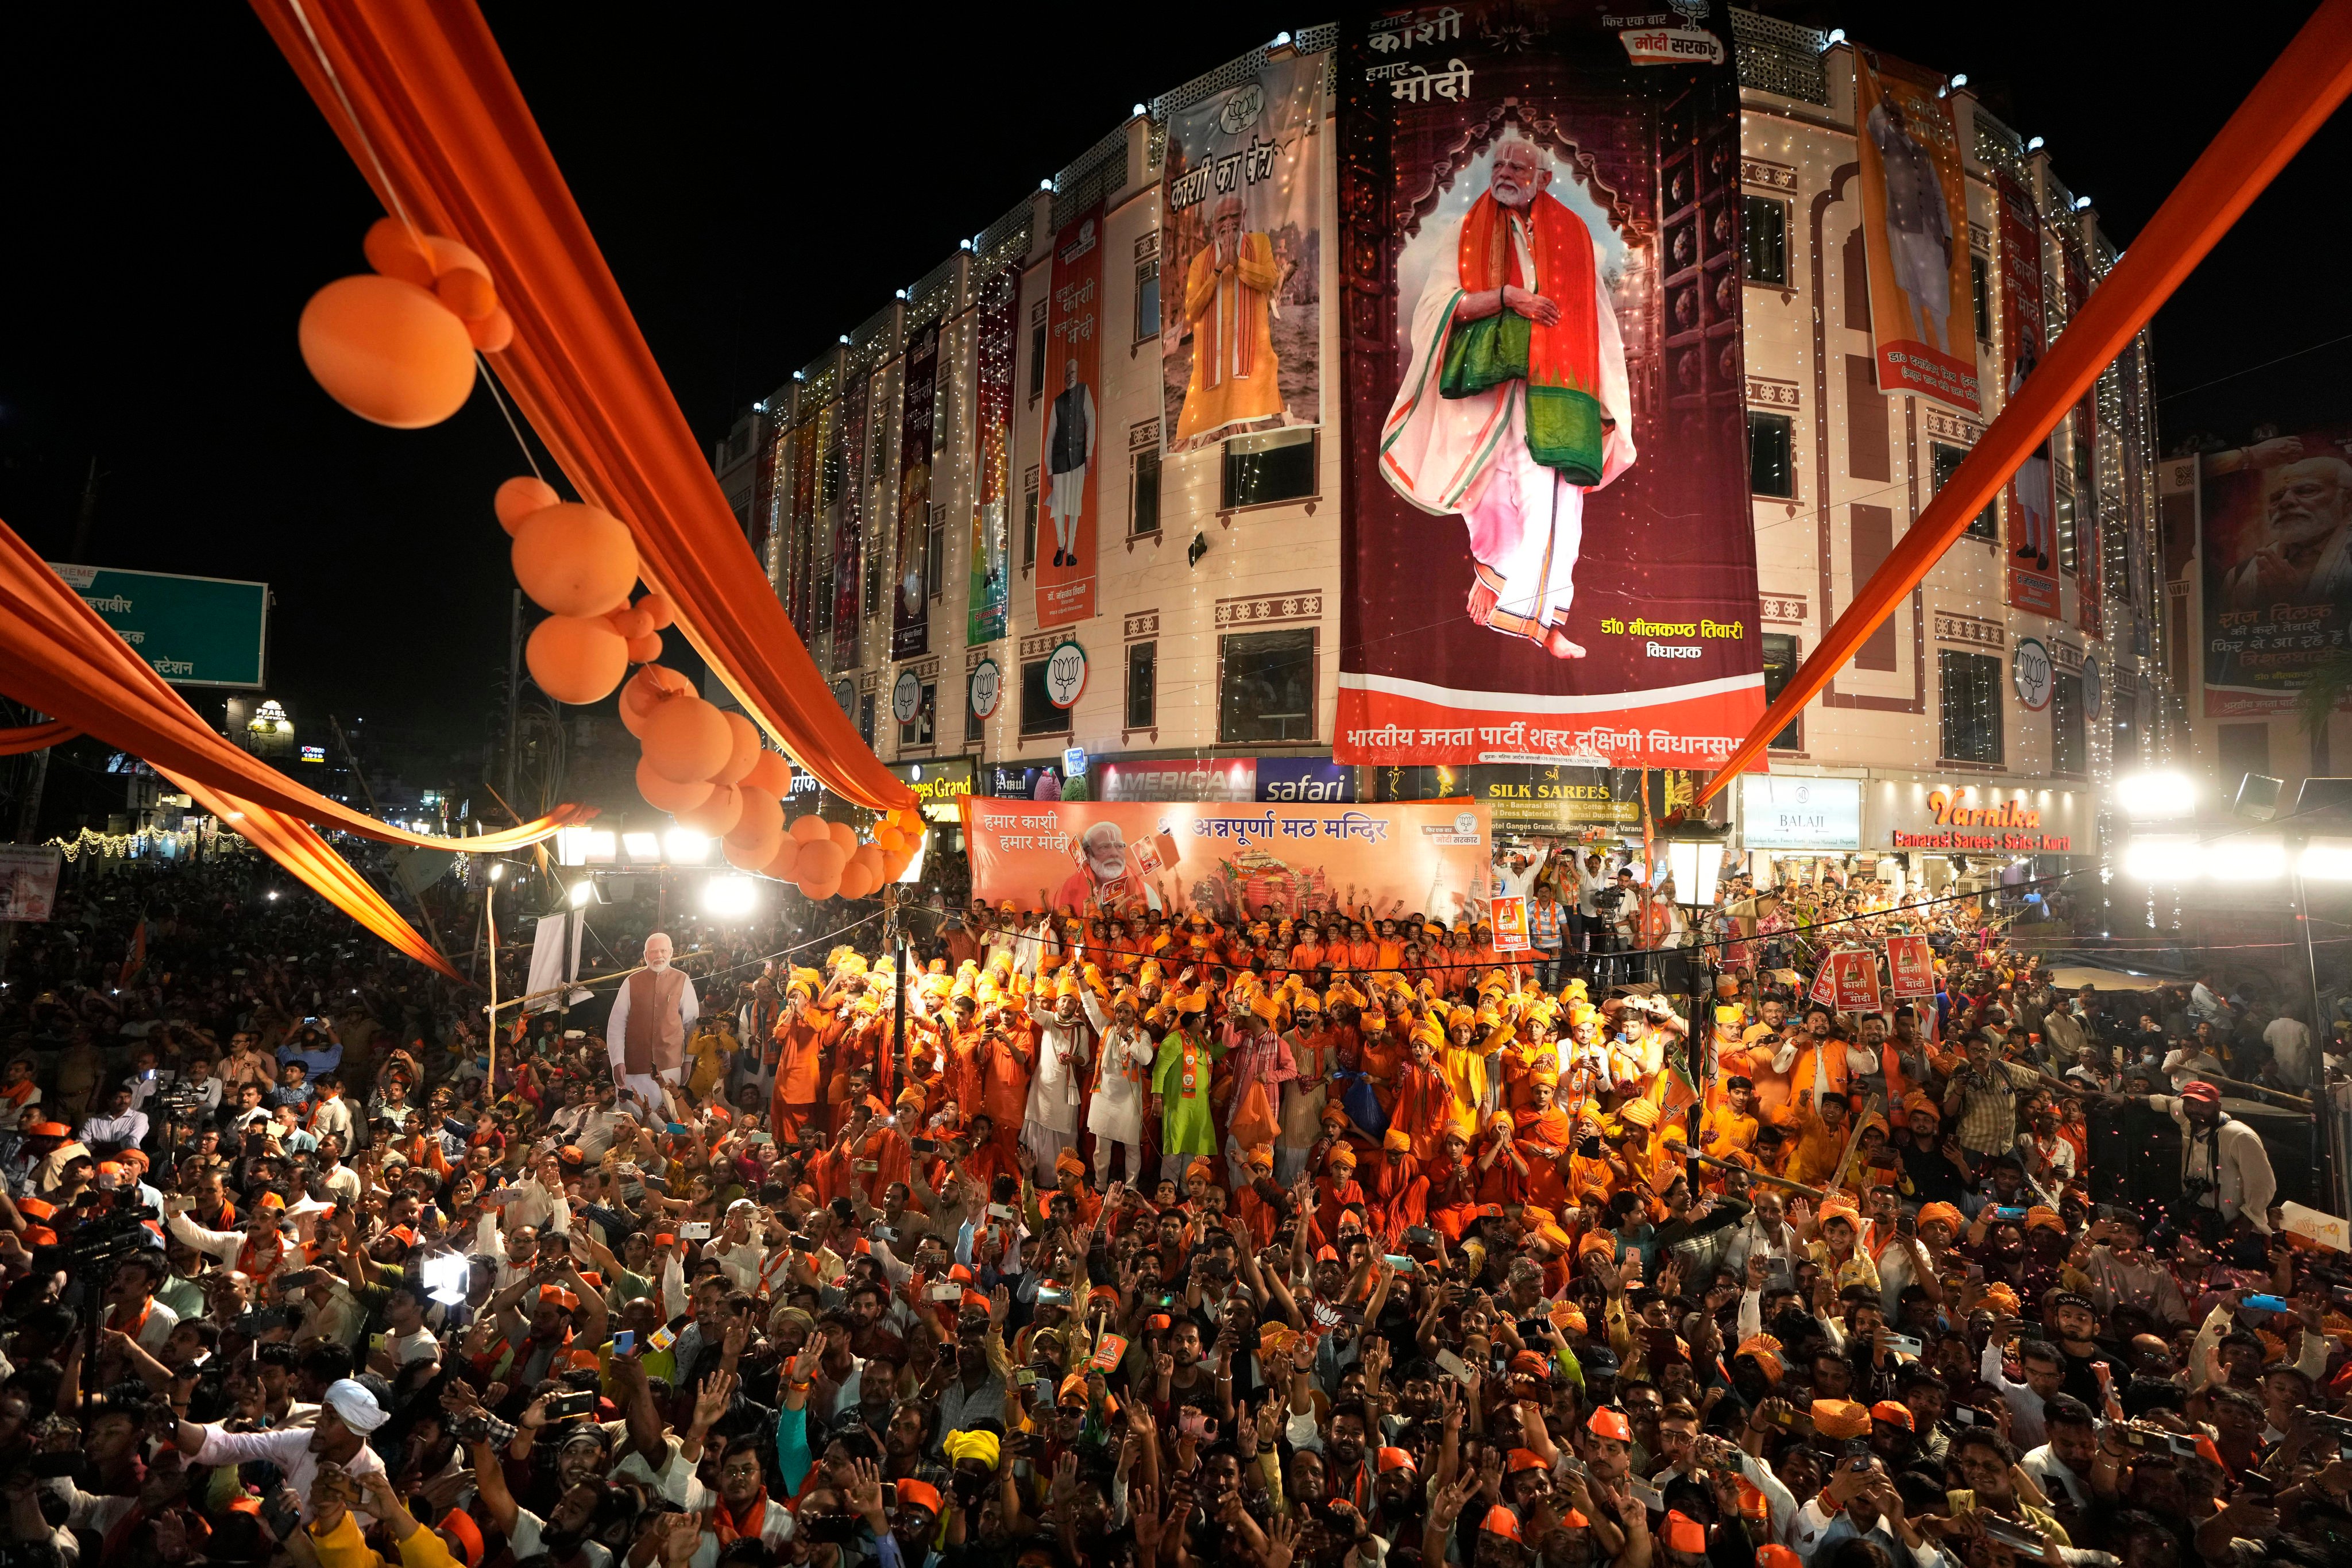 Supporters of the ruling Bharatiya Janata Party gather to greet Indian Prime Minister Narendra Modi during a campaign roadshow for the elections in Varanasi, India, on May 13. Photo: AP